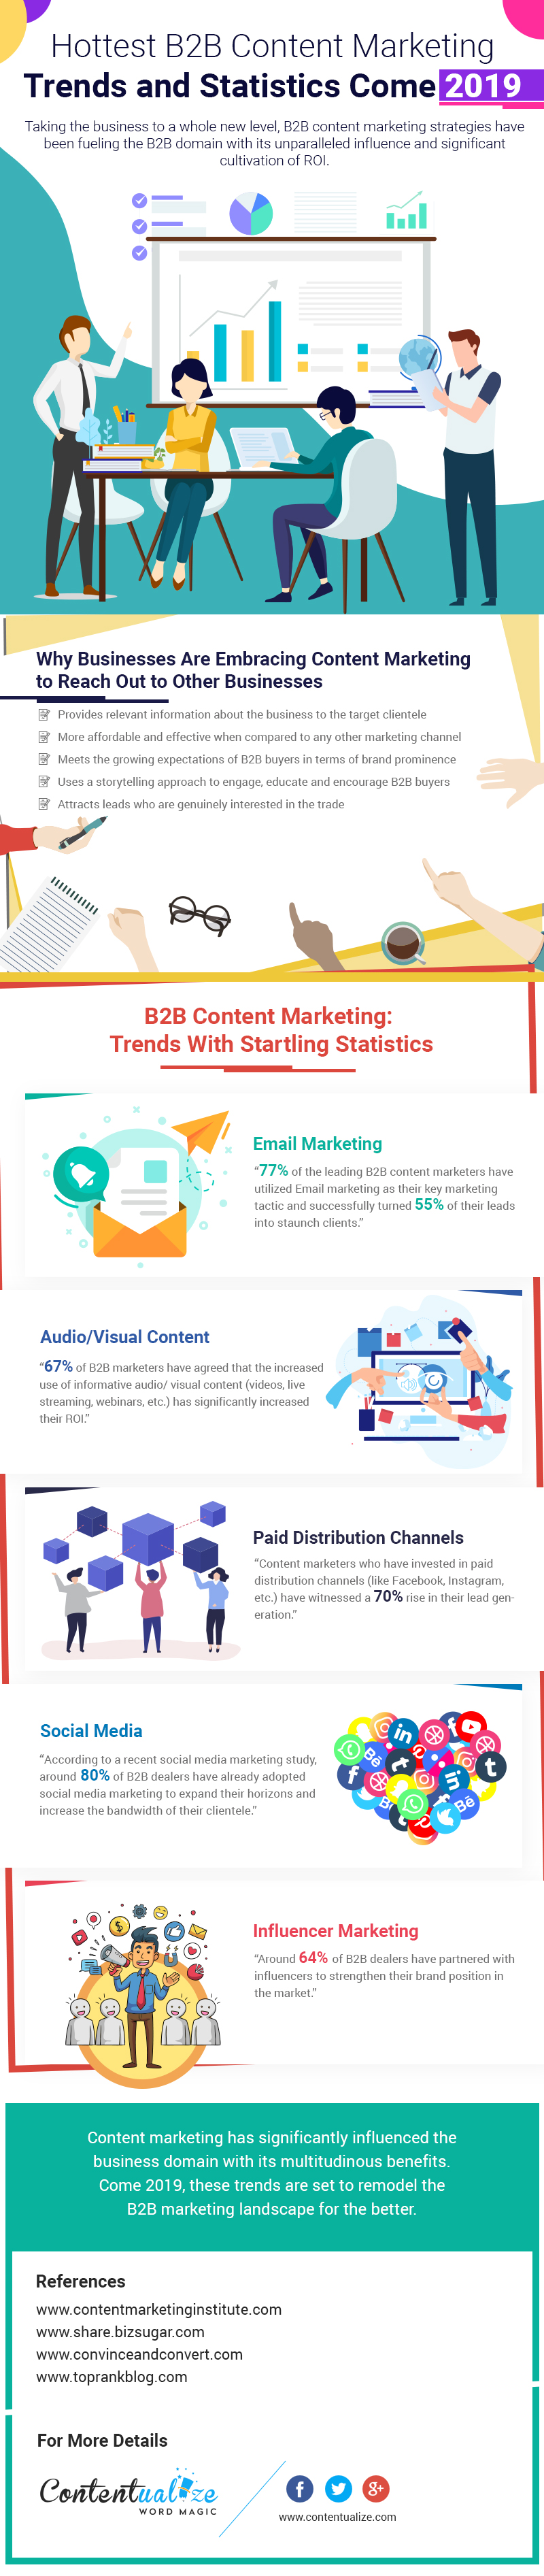 Hottest B2B Content Marketing Trends and Statistics in 2019 - Hottest B2B Content Marketing Trends and Statistics in 2019